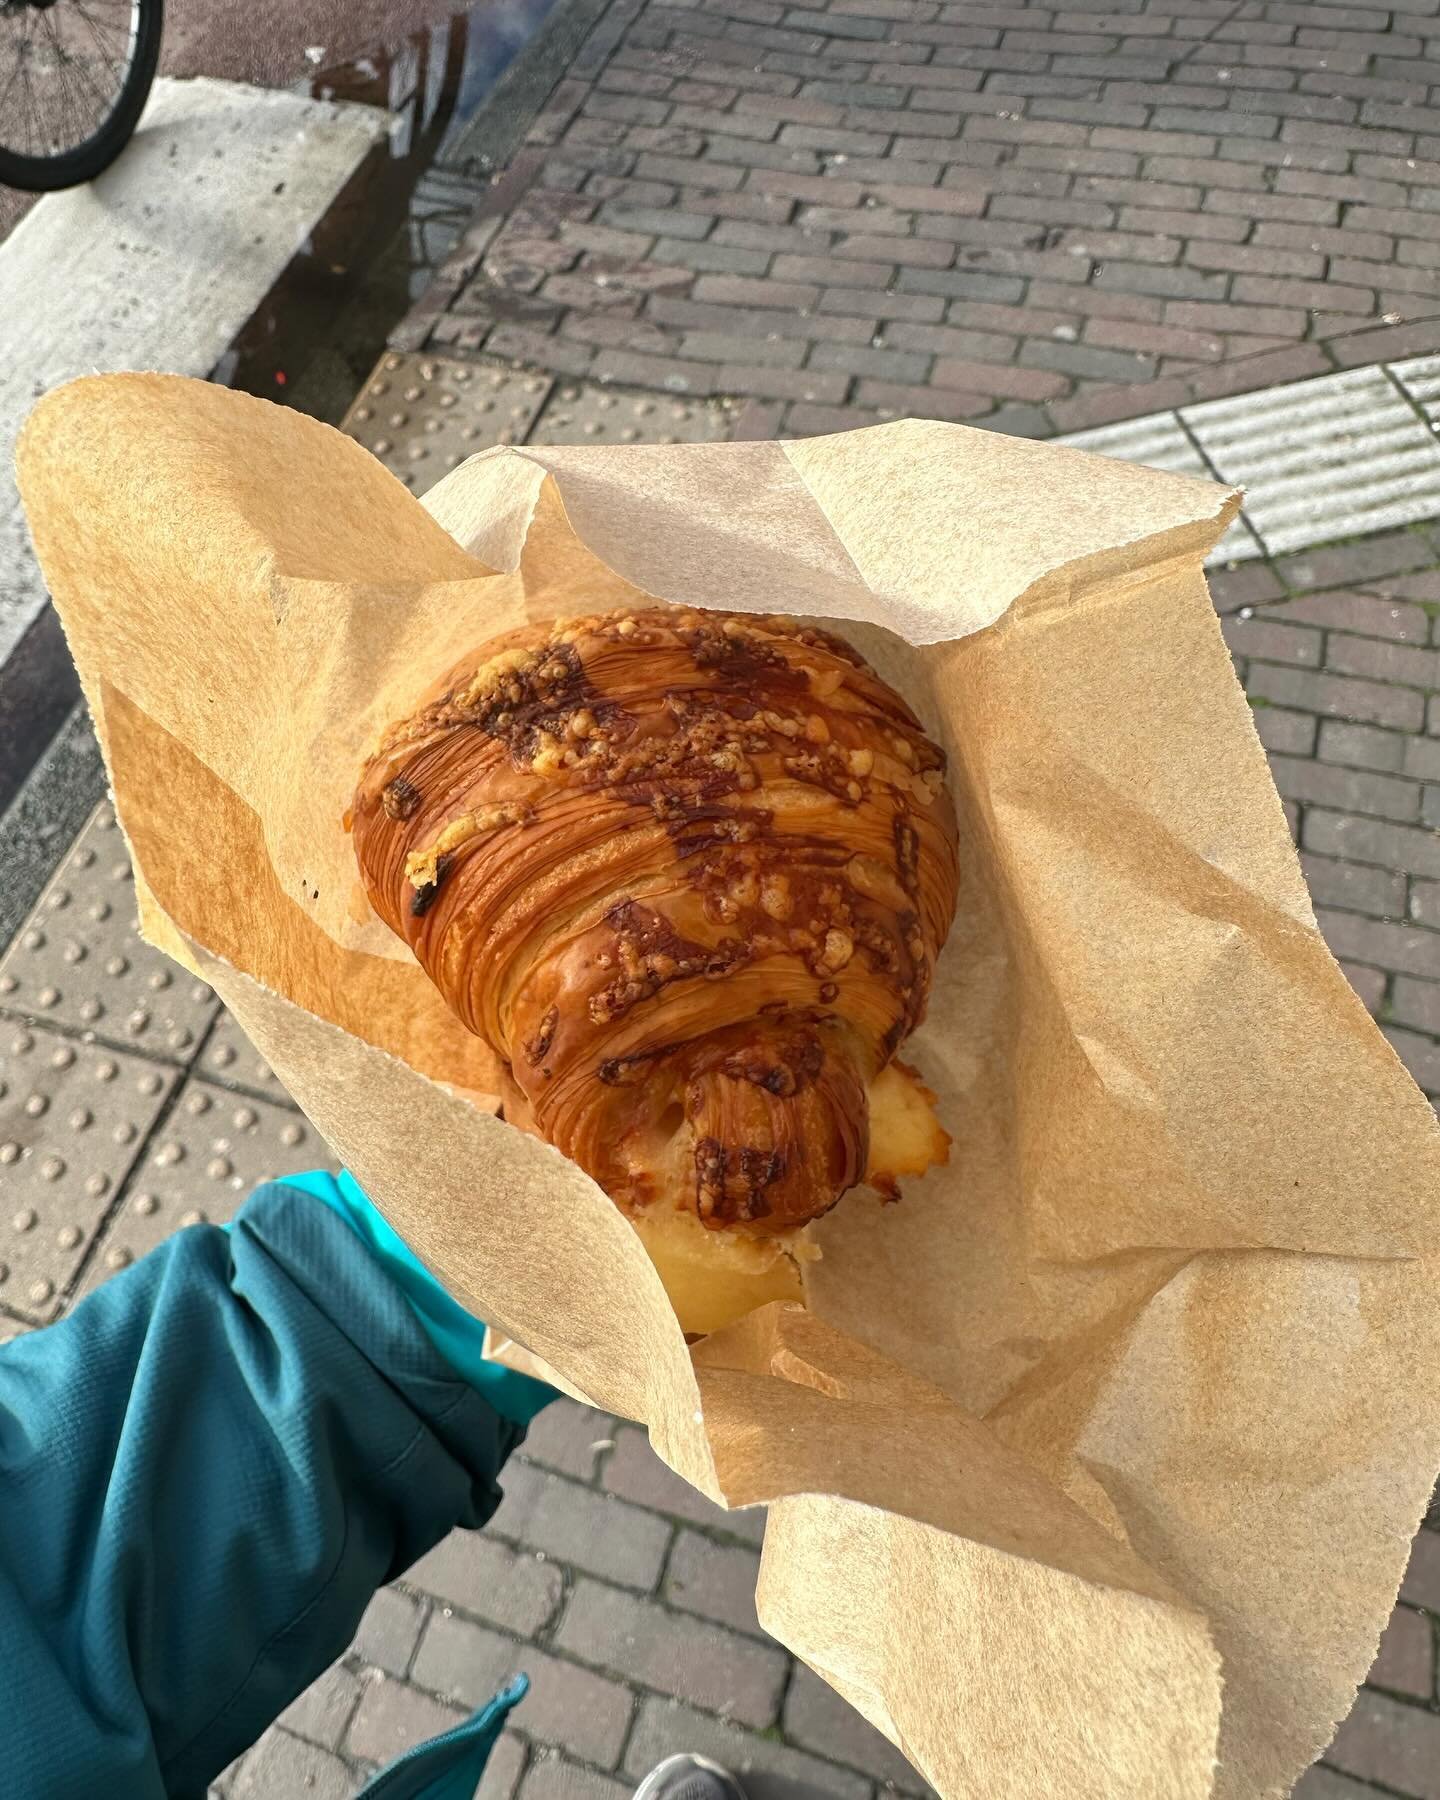 Bakeries are a love language of mine. Not just because they taste delicious and feel inspiring. But when I eat a damn good croissant or have an amazing piece of fresh bread, my heart feels connected to my mom (who passed away almost 14 years ago) as 